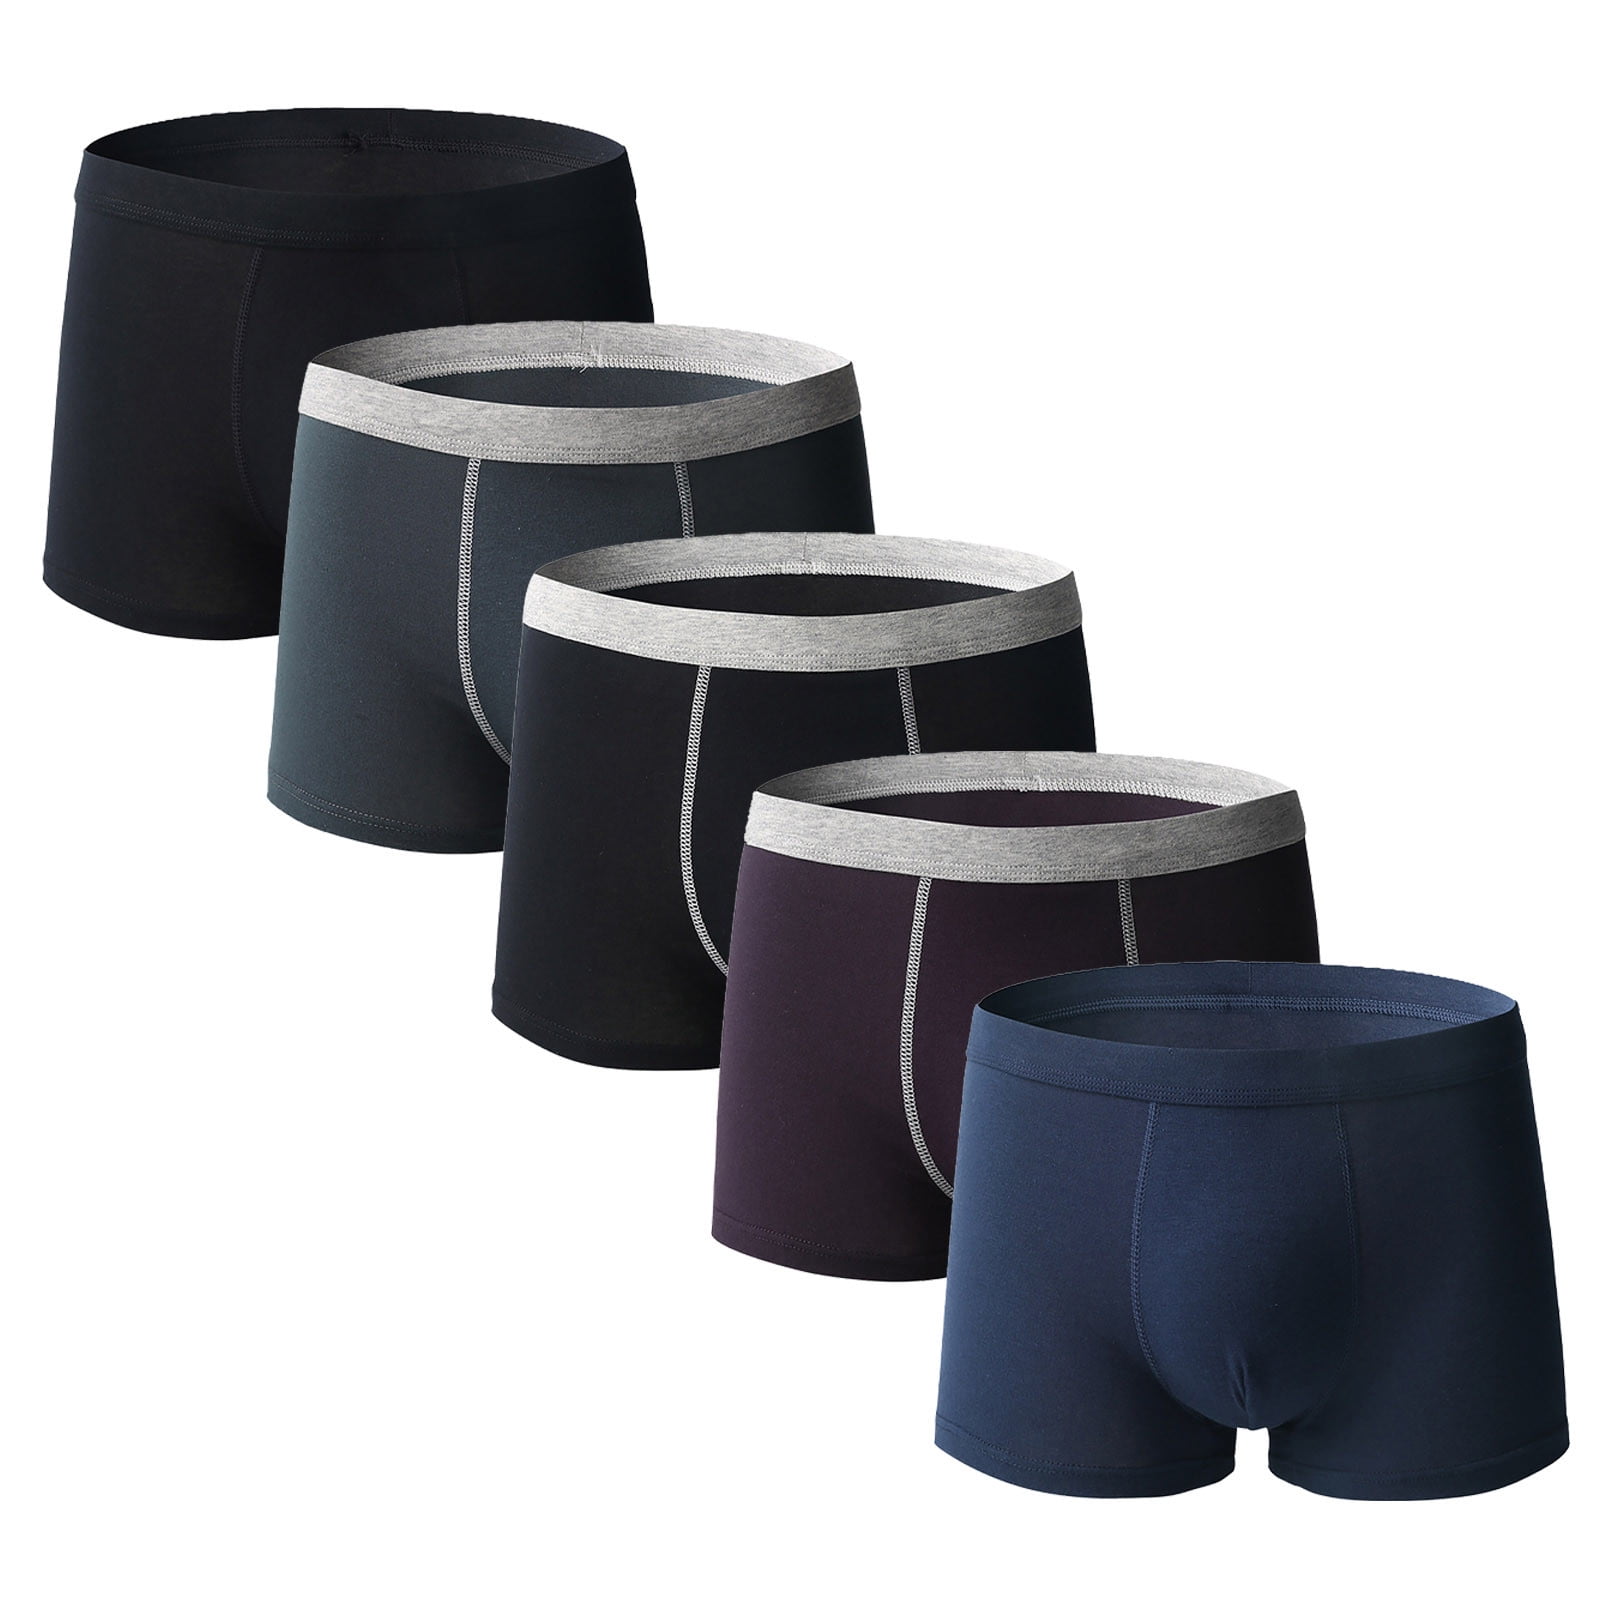 QWERTYU Mens Comfort 5 Pack Pouch Trunks Stretch Male Underwear Soft ...